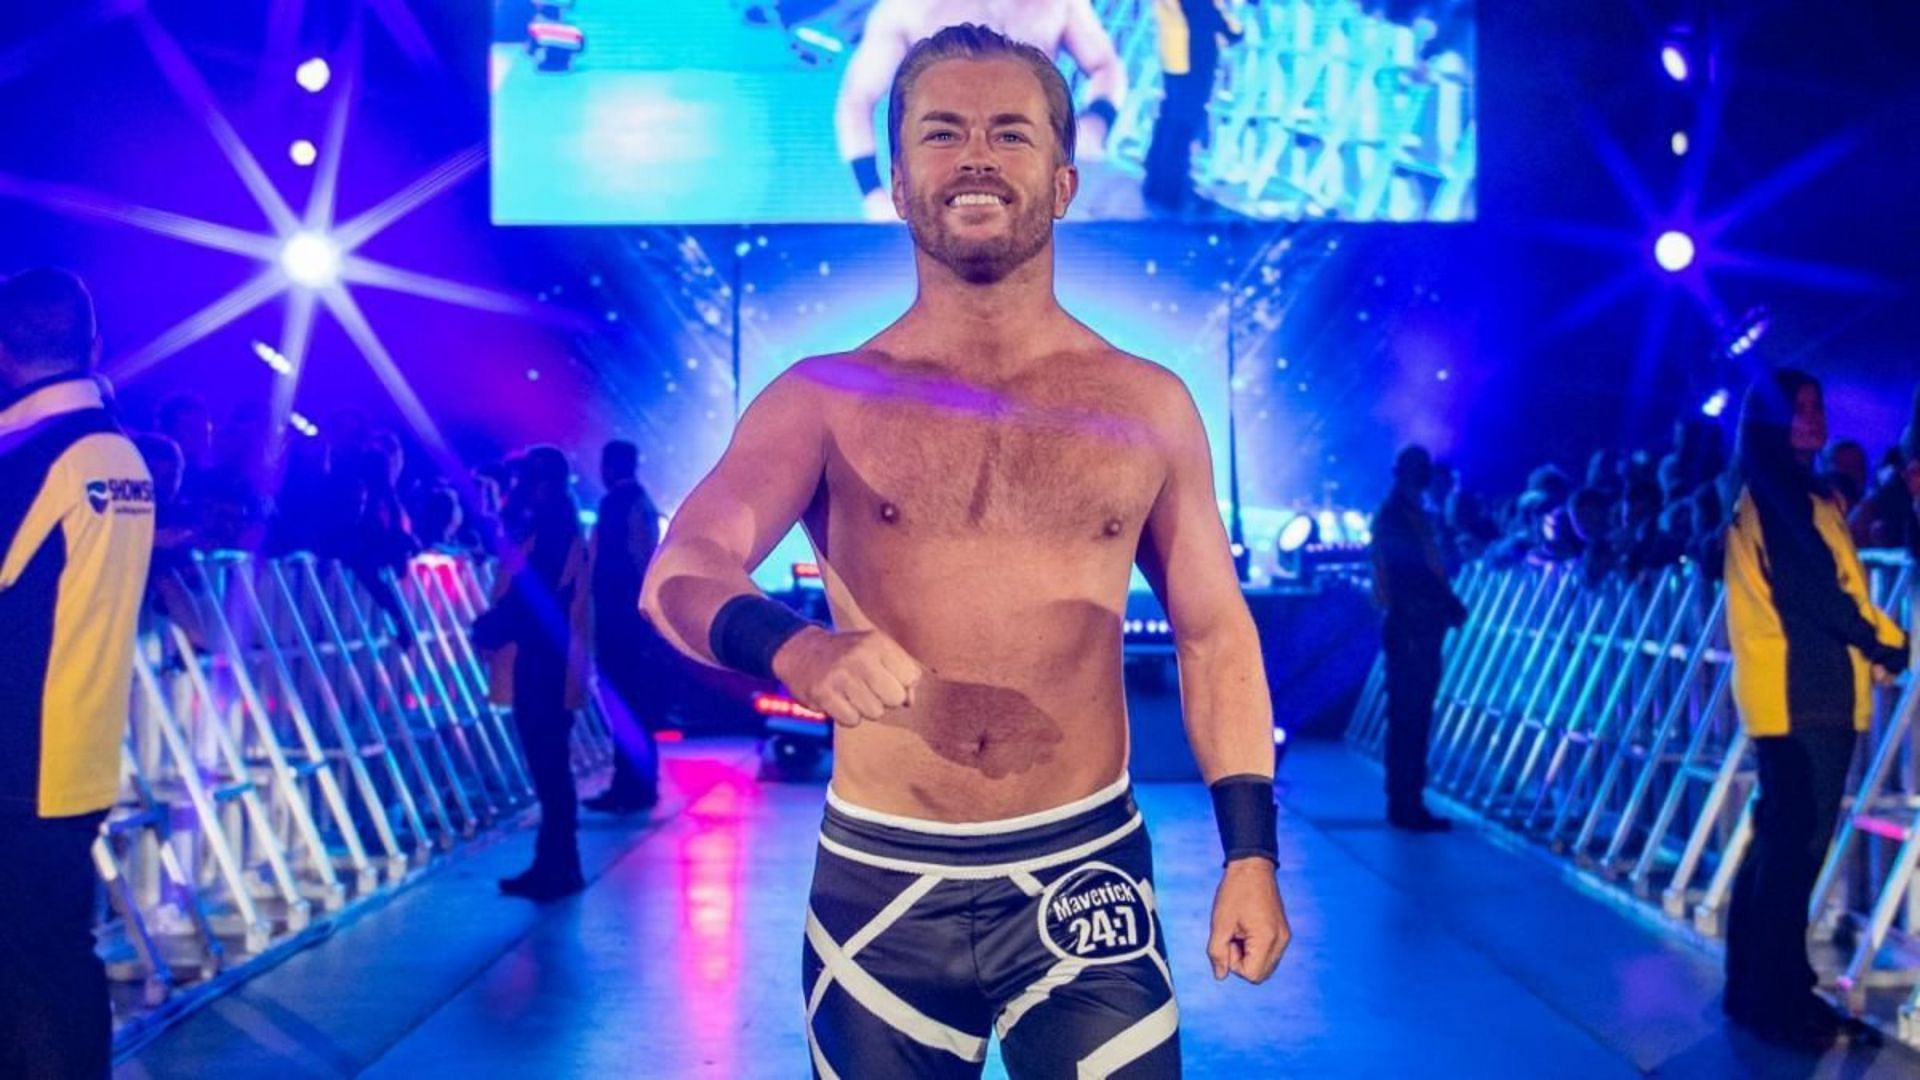 Drake Maverick got released from his contract twice in 2020 and 2021